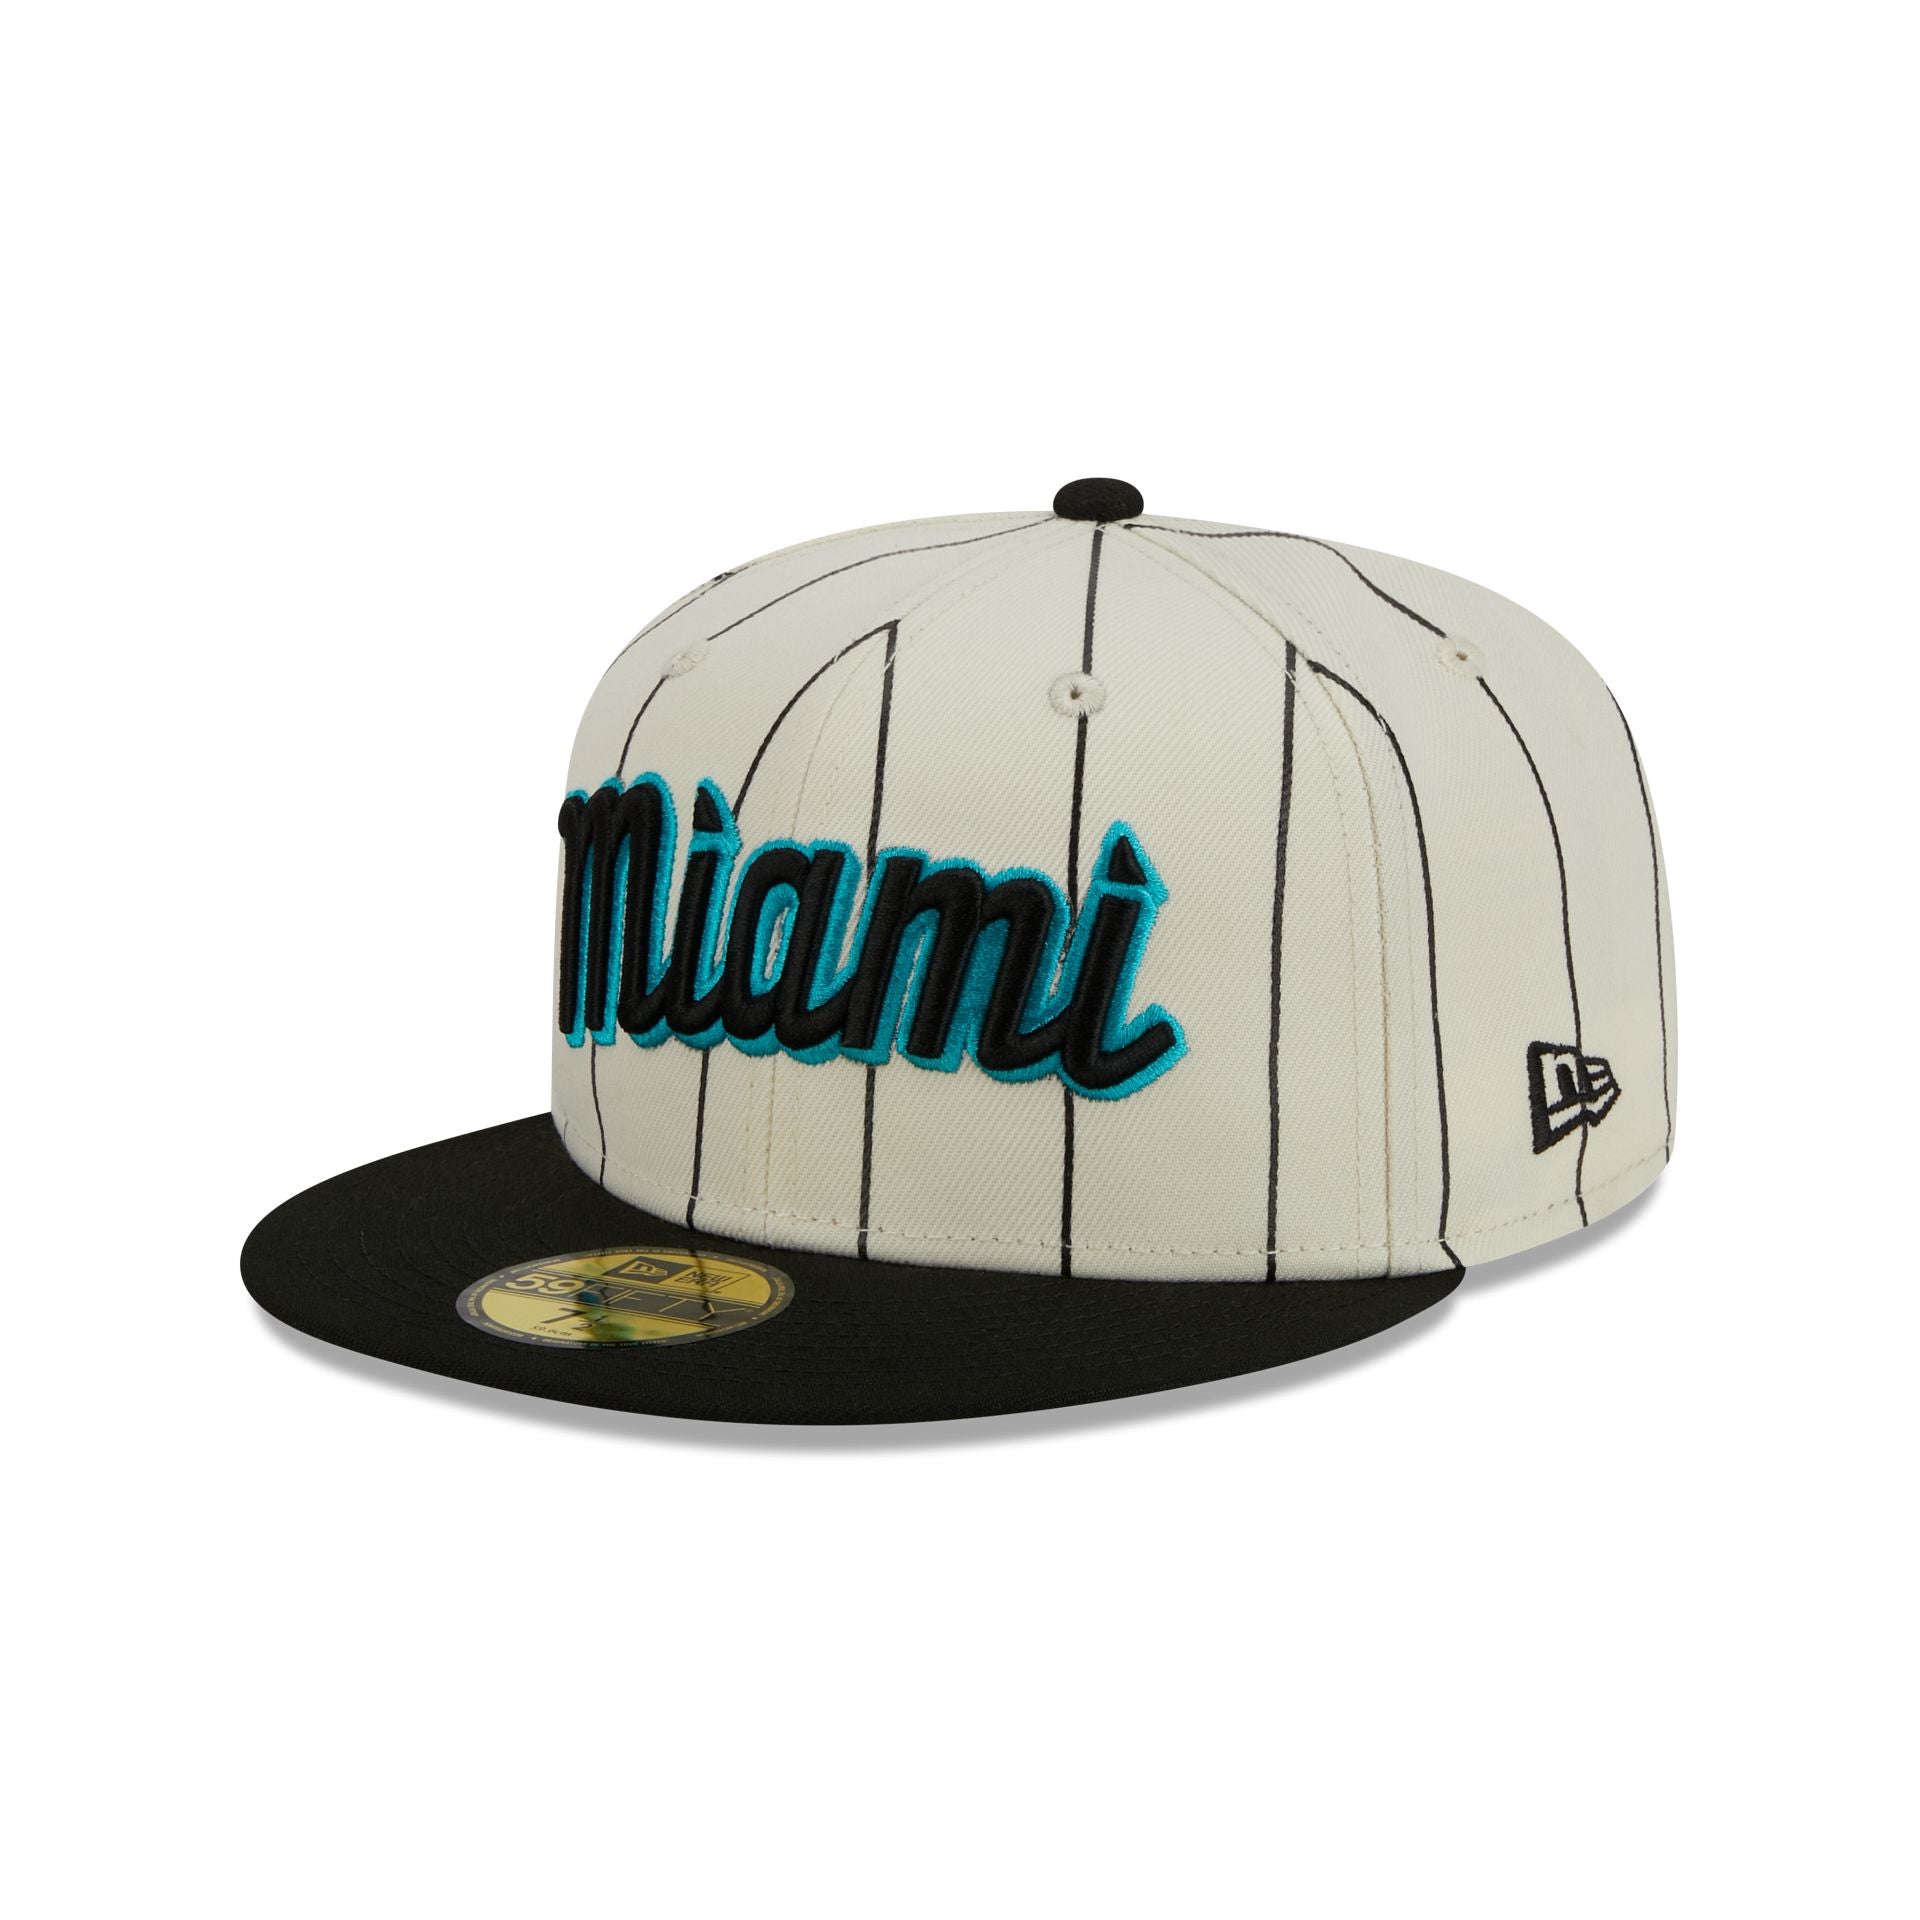 New Era Men's Miami Marlins Batting Practice Black 59Fifty Fitted Hat